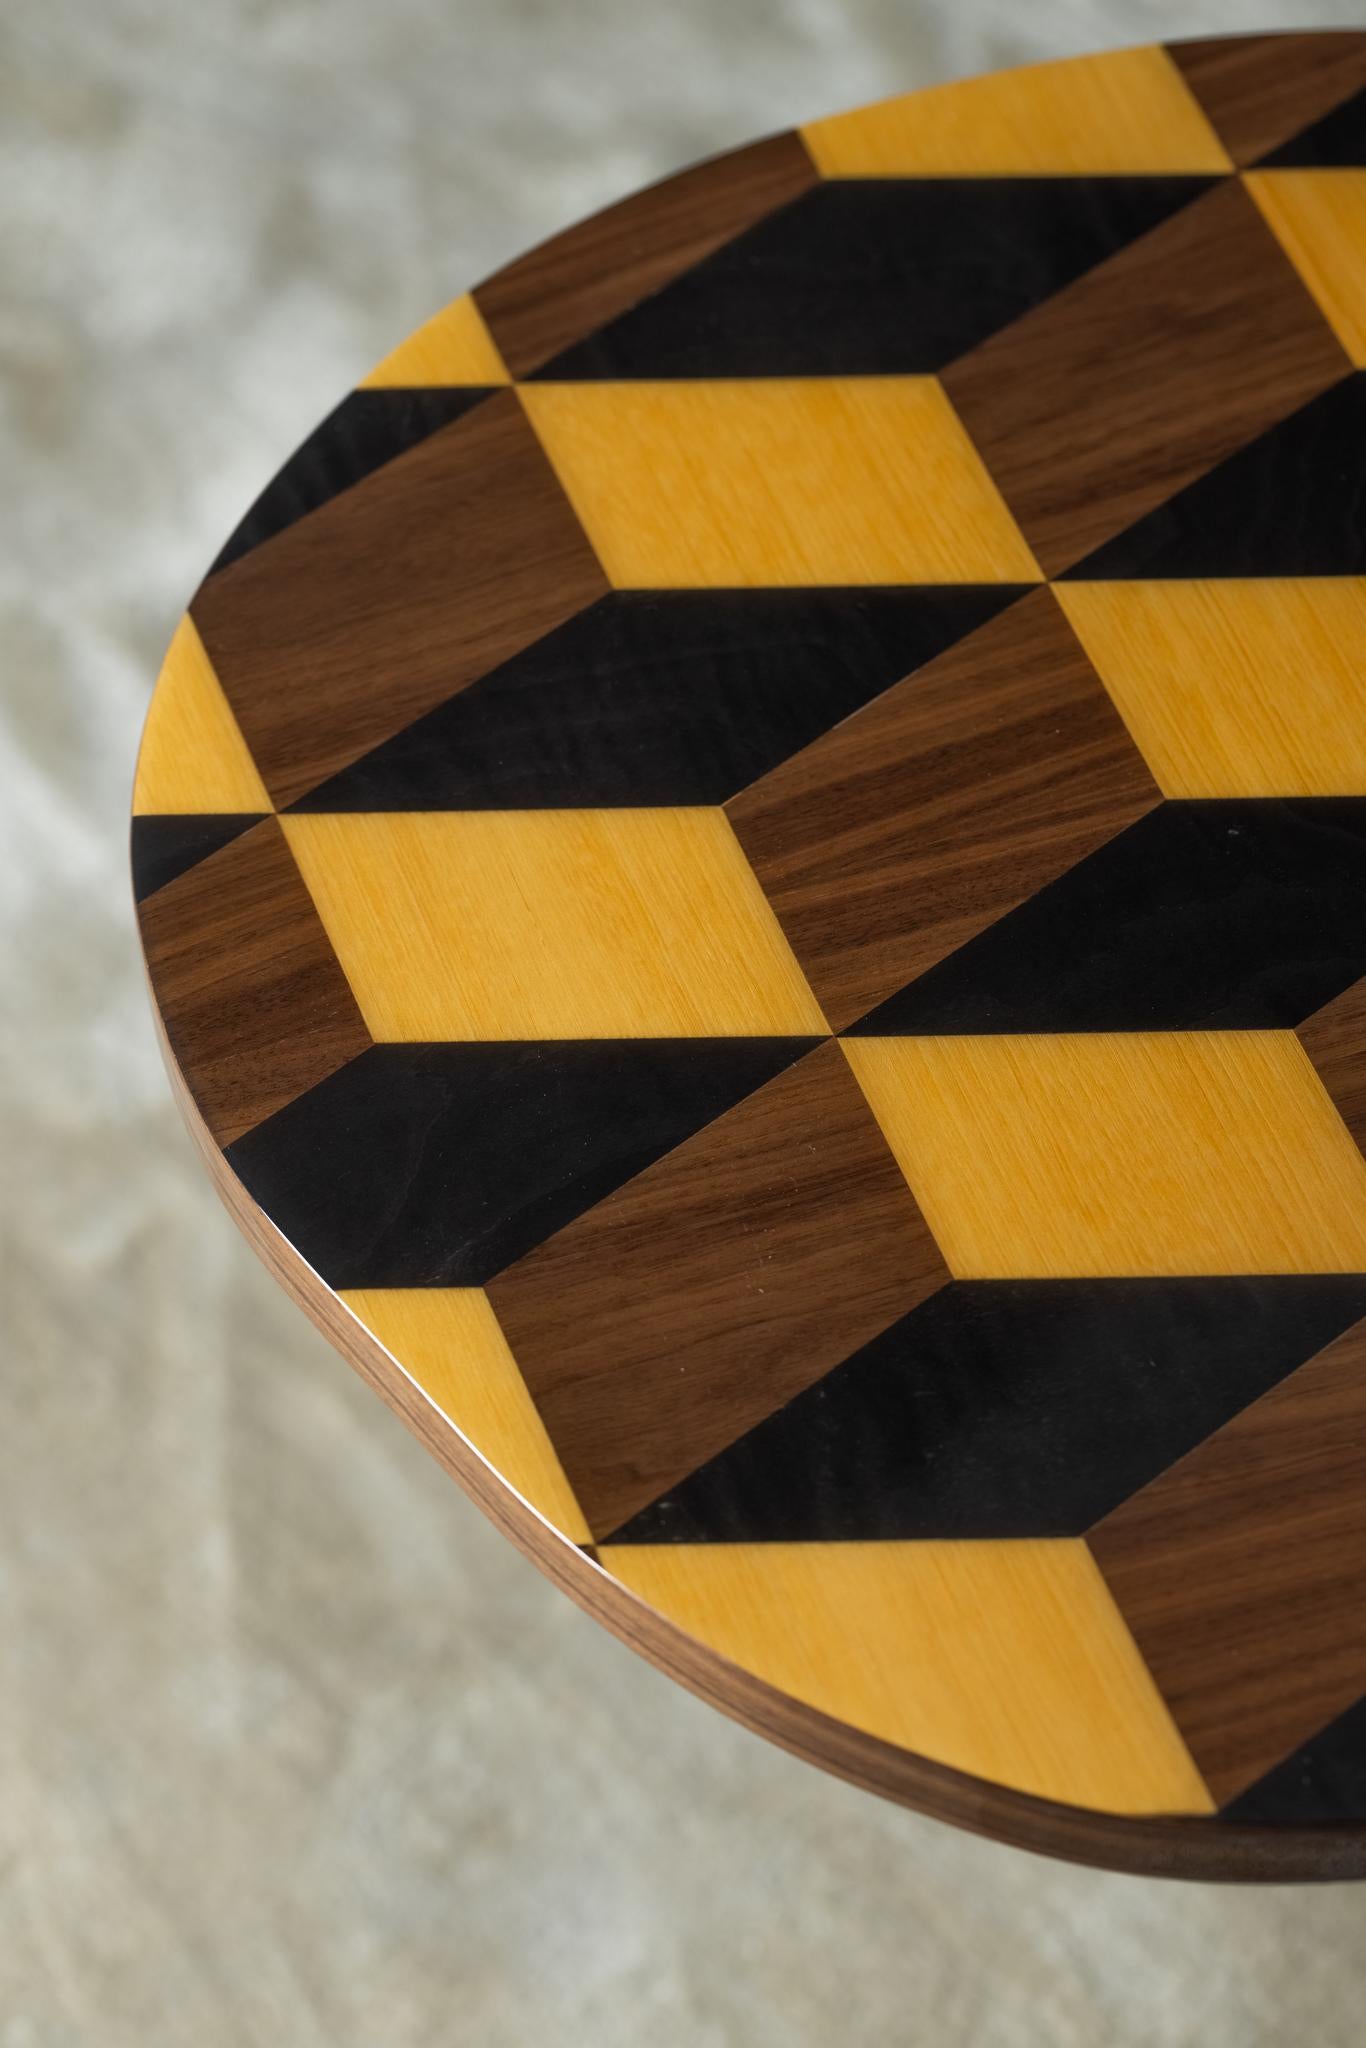 Marquetry Infinity Side Table, Handcrafted in Portugal - Europe by Greenapple.

Handcrafted with precision and care, the Infinity side table presents the art of marquetry in its most refined form, where high-quality wood veneers seamlessly merge to